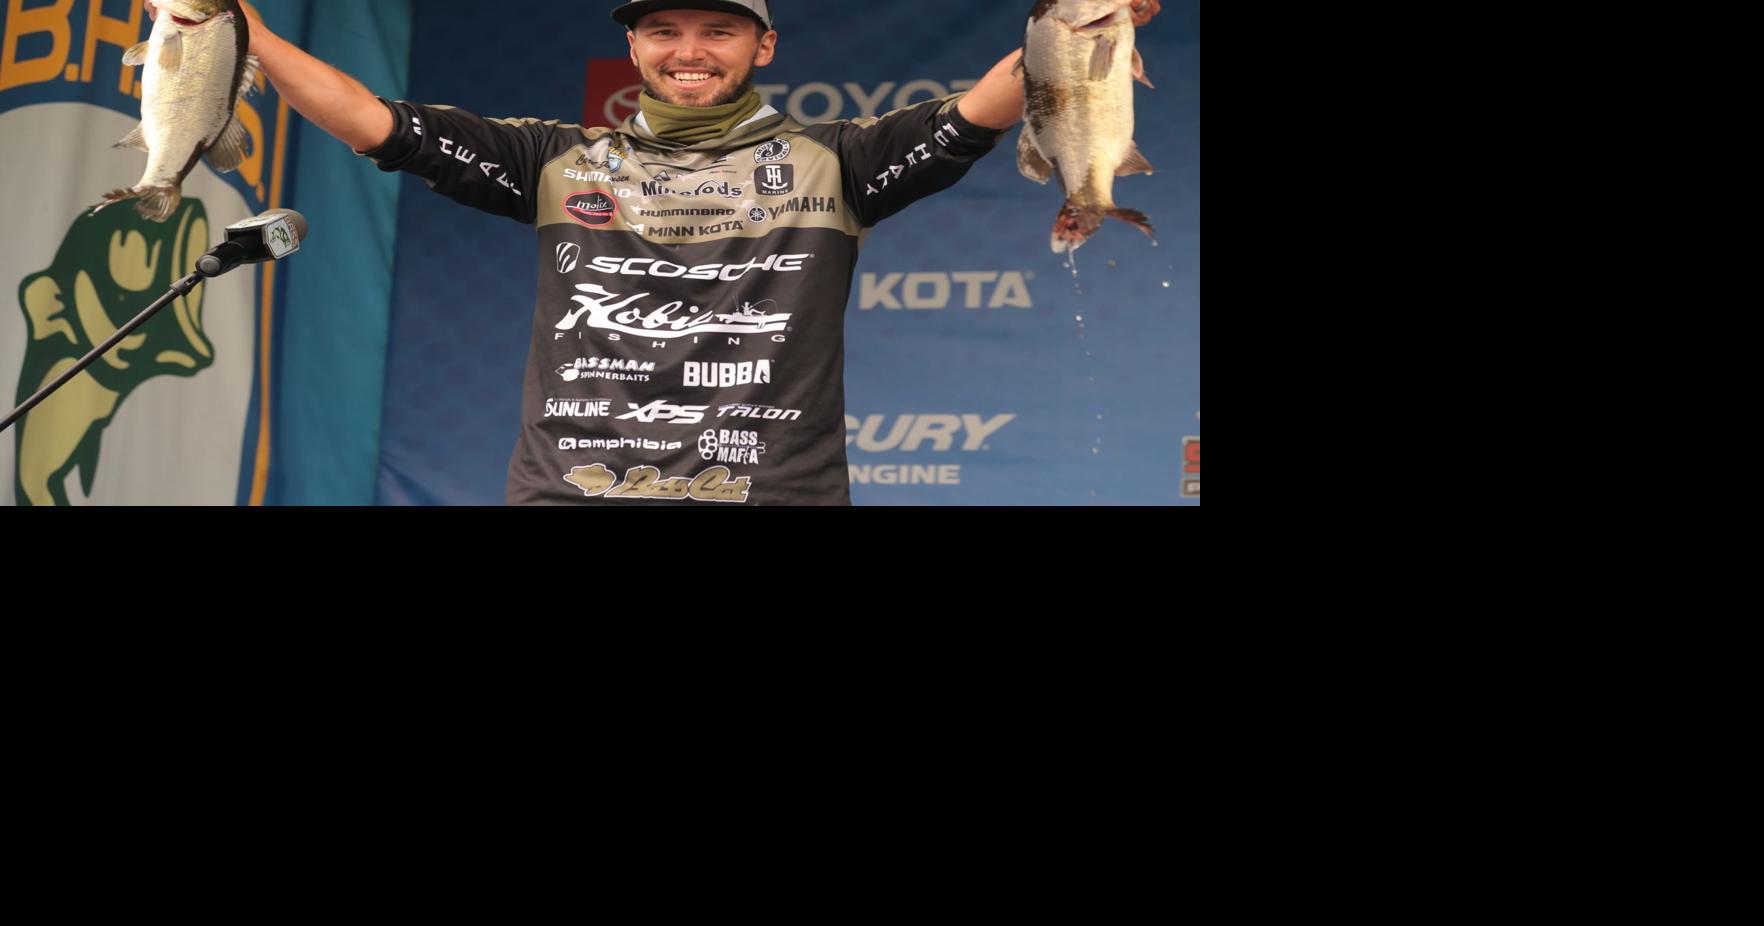 Late catch pushes Jocumsen Into lead At Bassmaster Elite